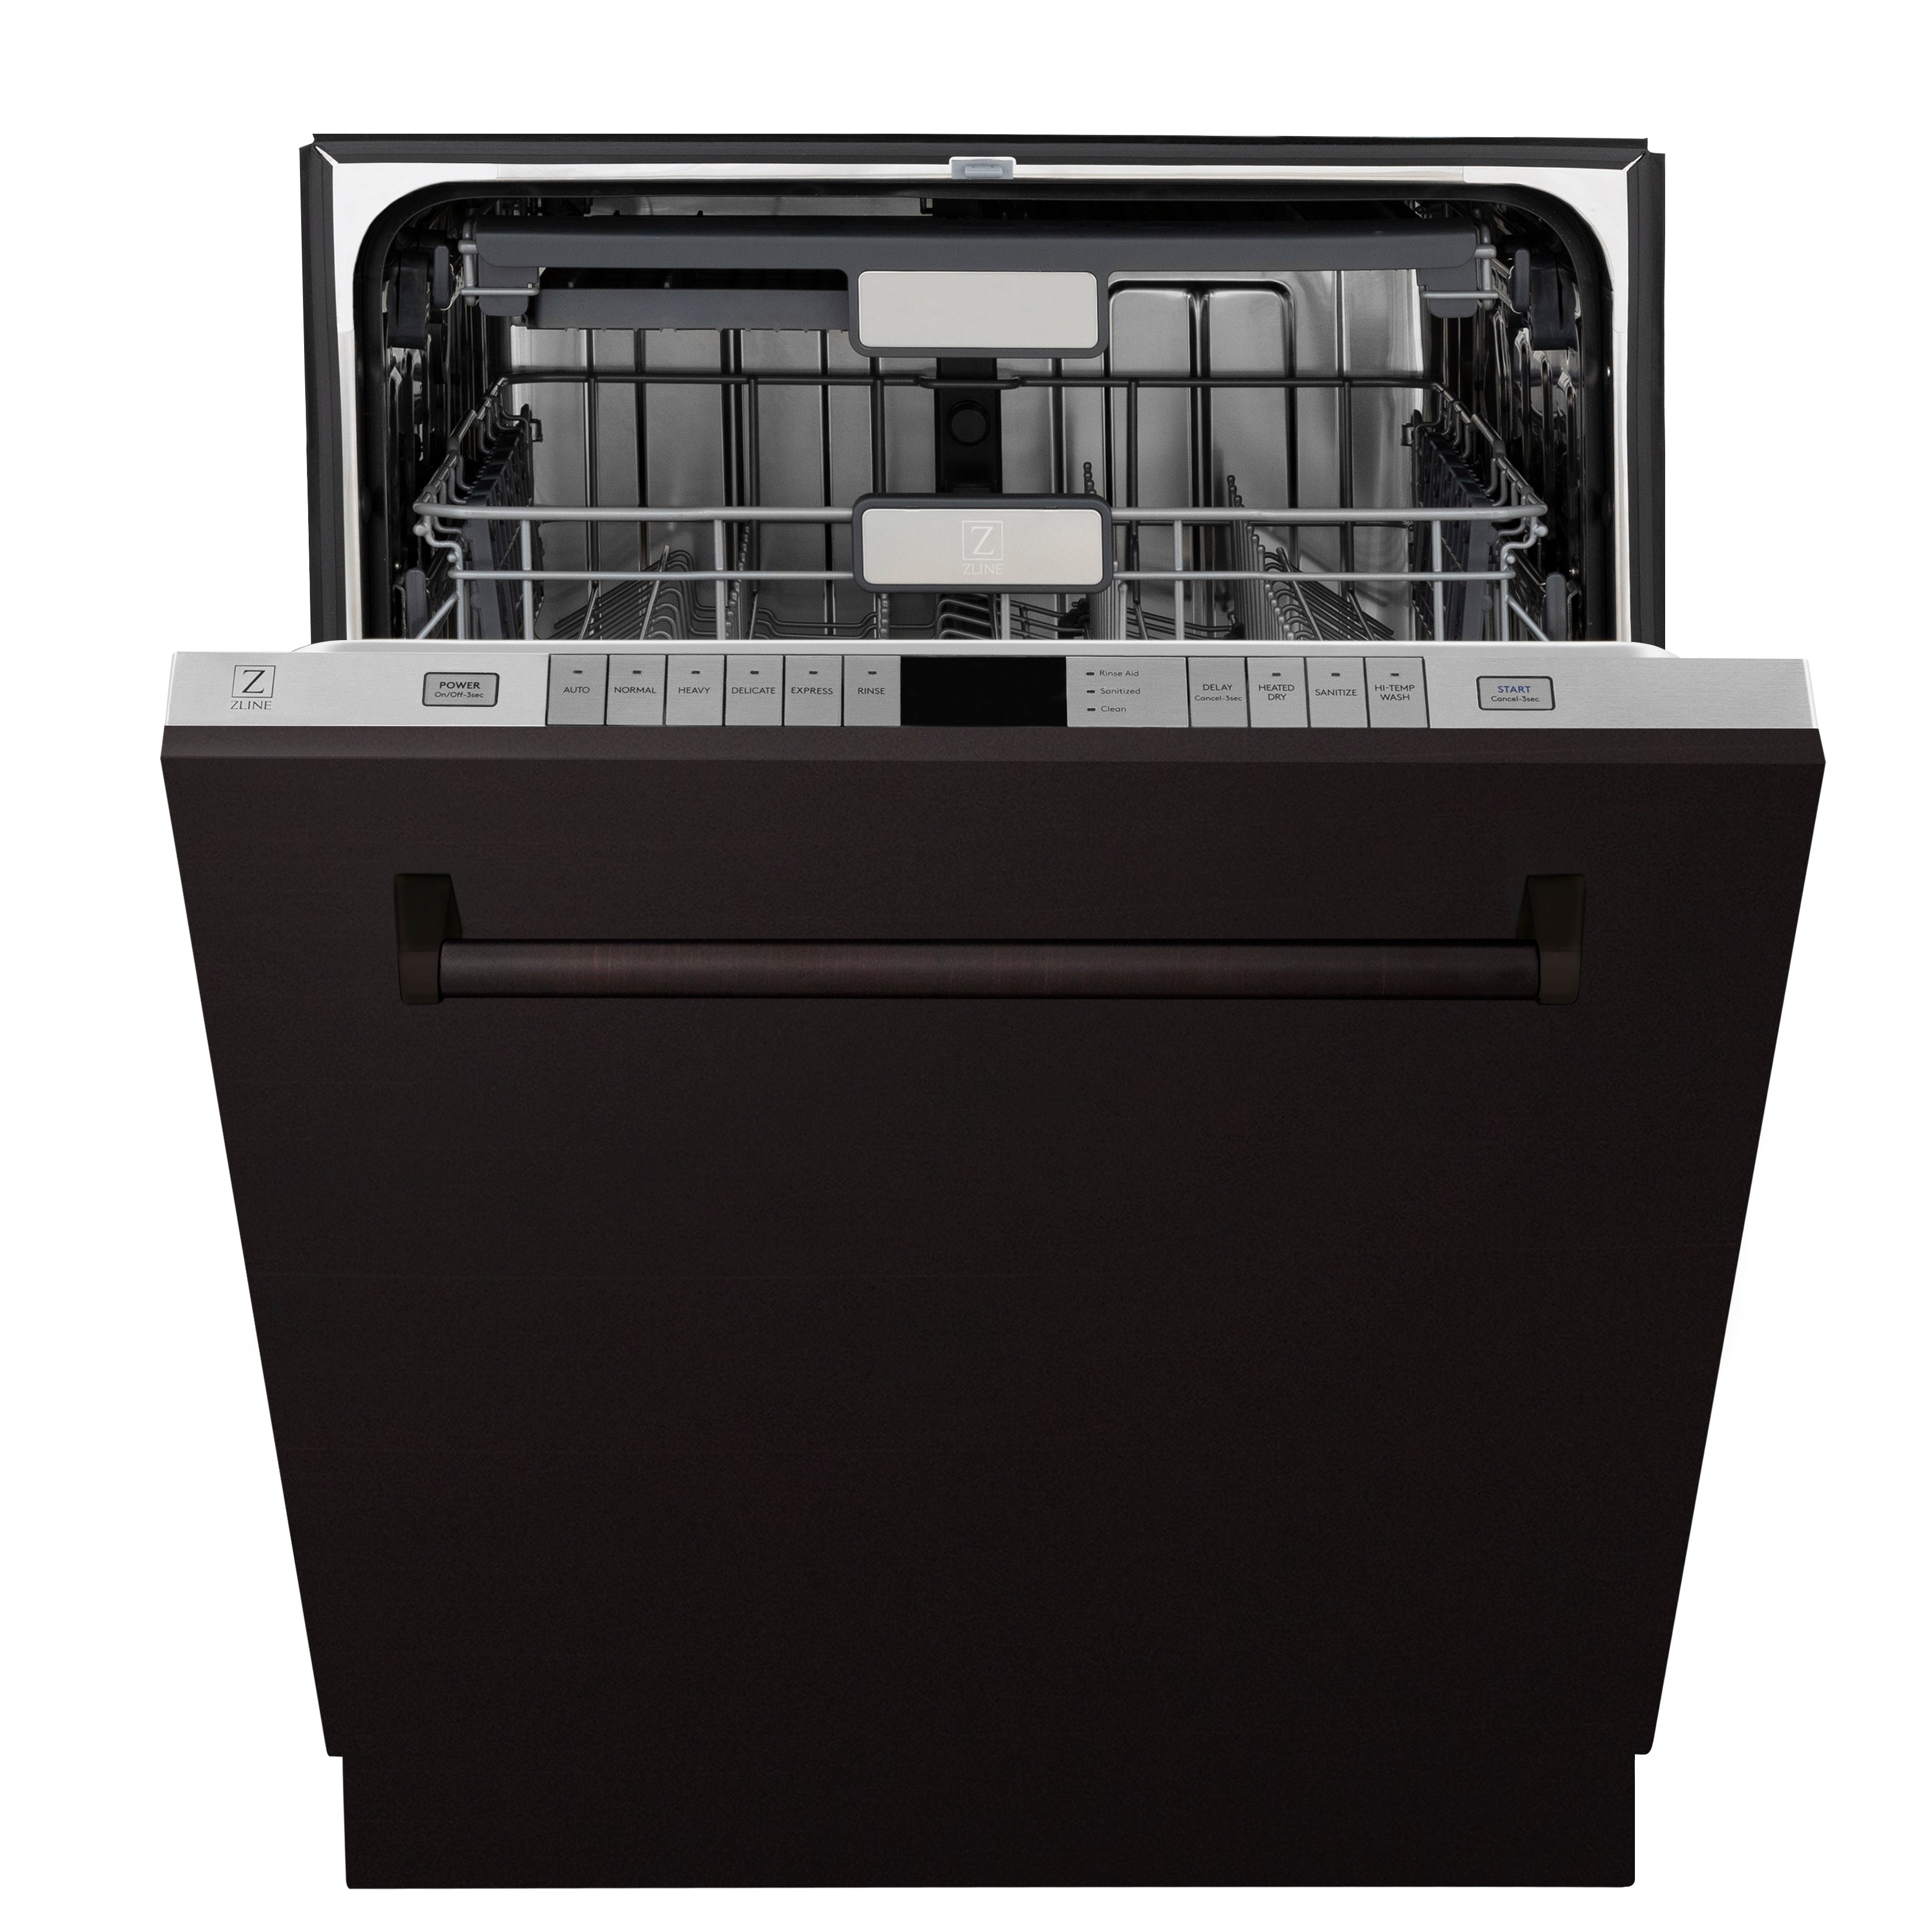 ZLINE 24" Monument Series 3rd Rack Top Touch Control Dishwasher in Oil Rubbed Bronze with Stainless Steel Tub, 45dBa